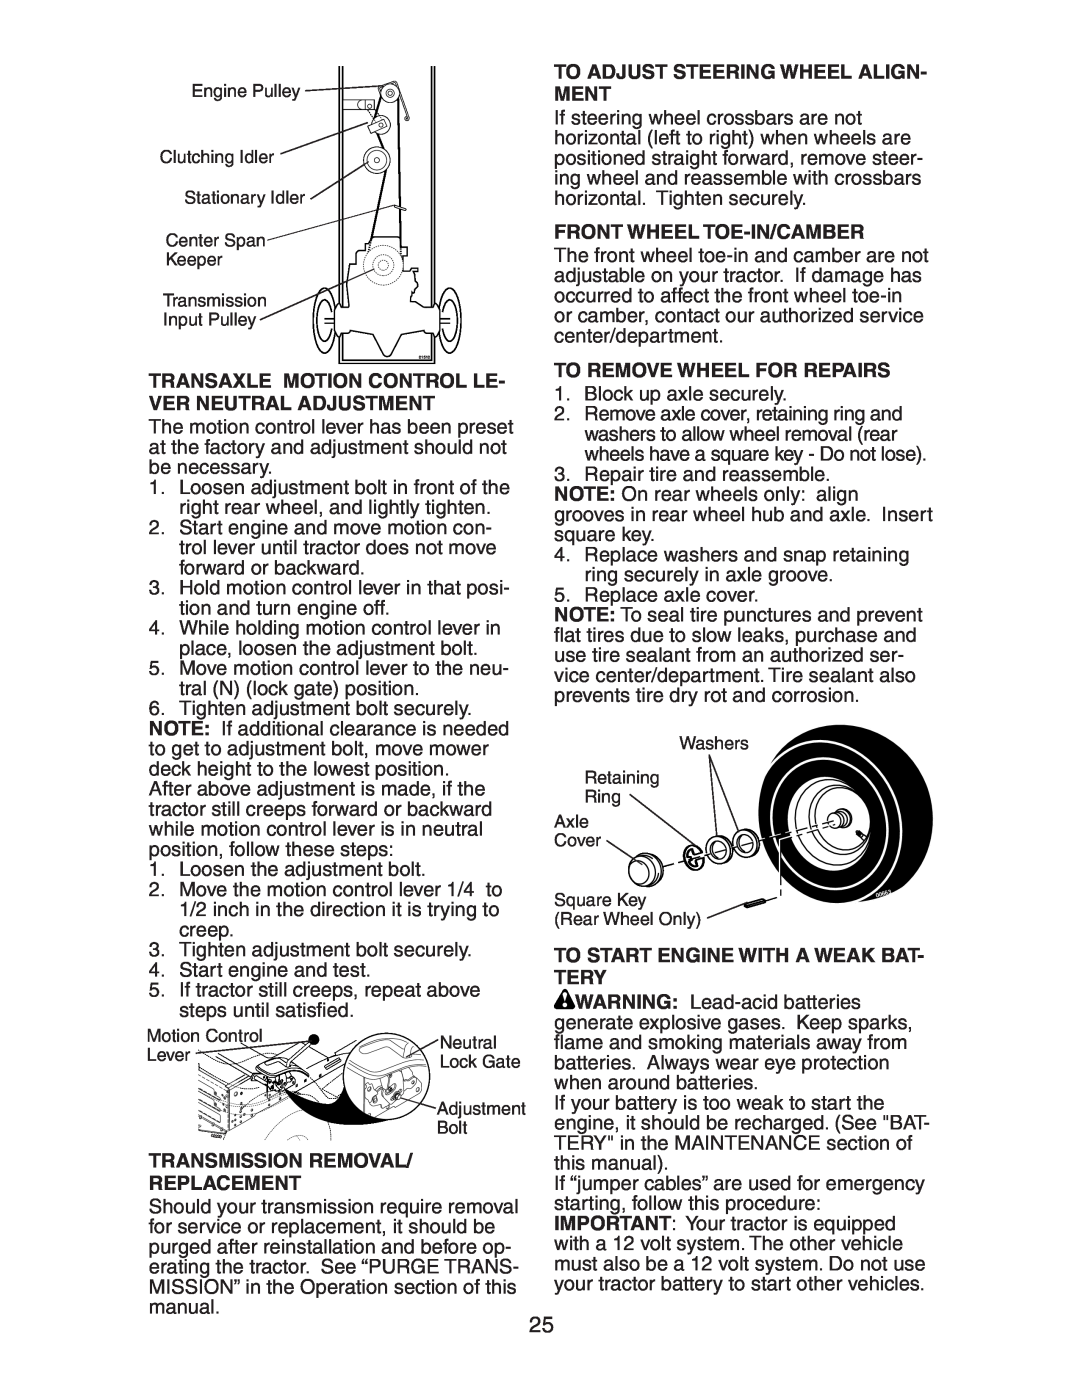 Electrolux AG22H42STA manual Transaxle Motion Control Le- Ver Neutral Adjustment, To Adjust Steering Wheel Align- Ment 